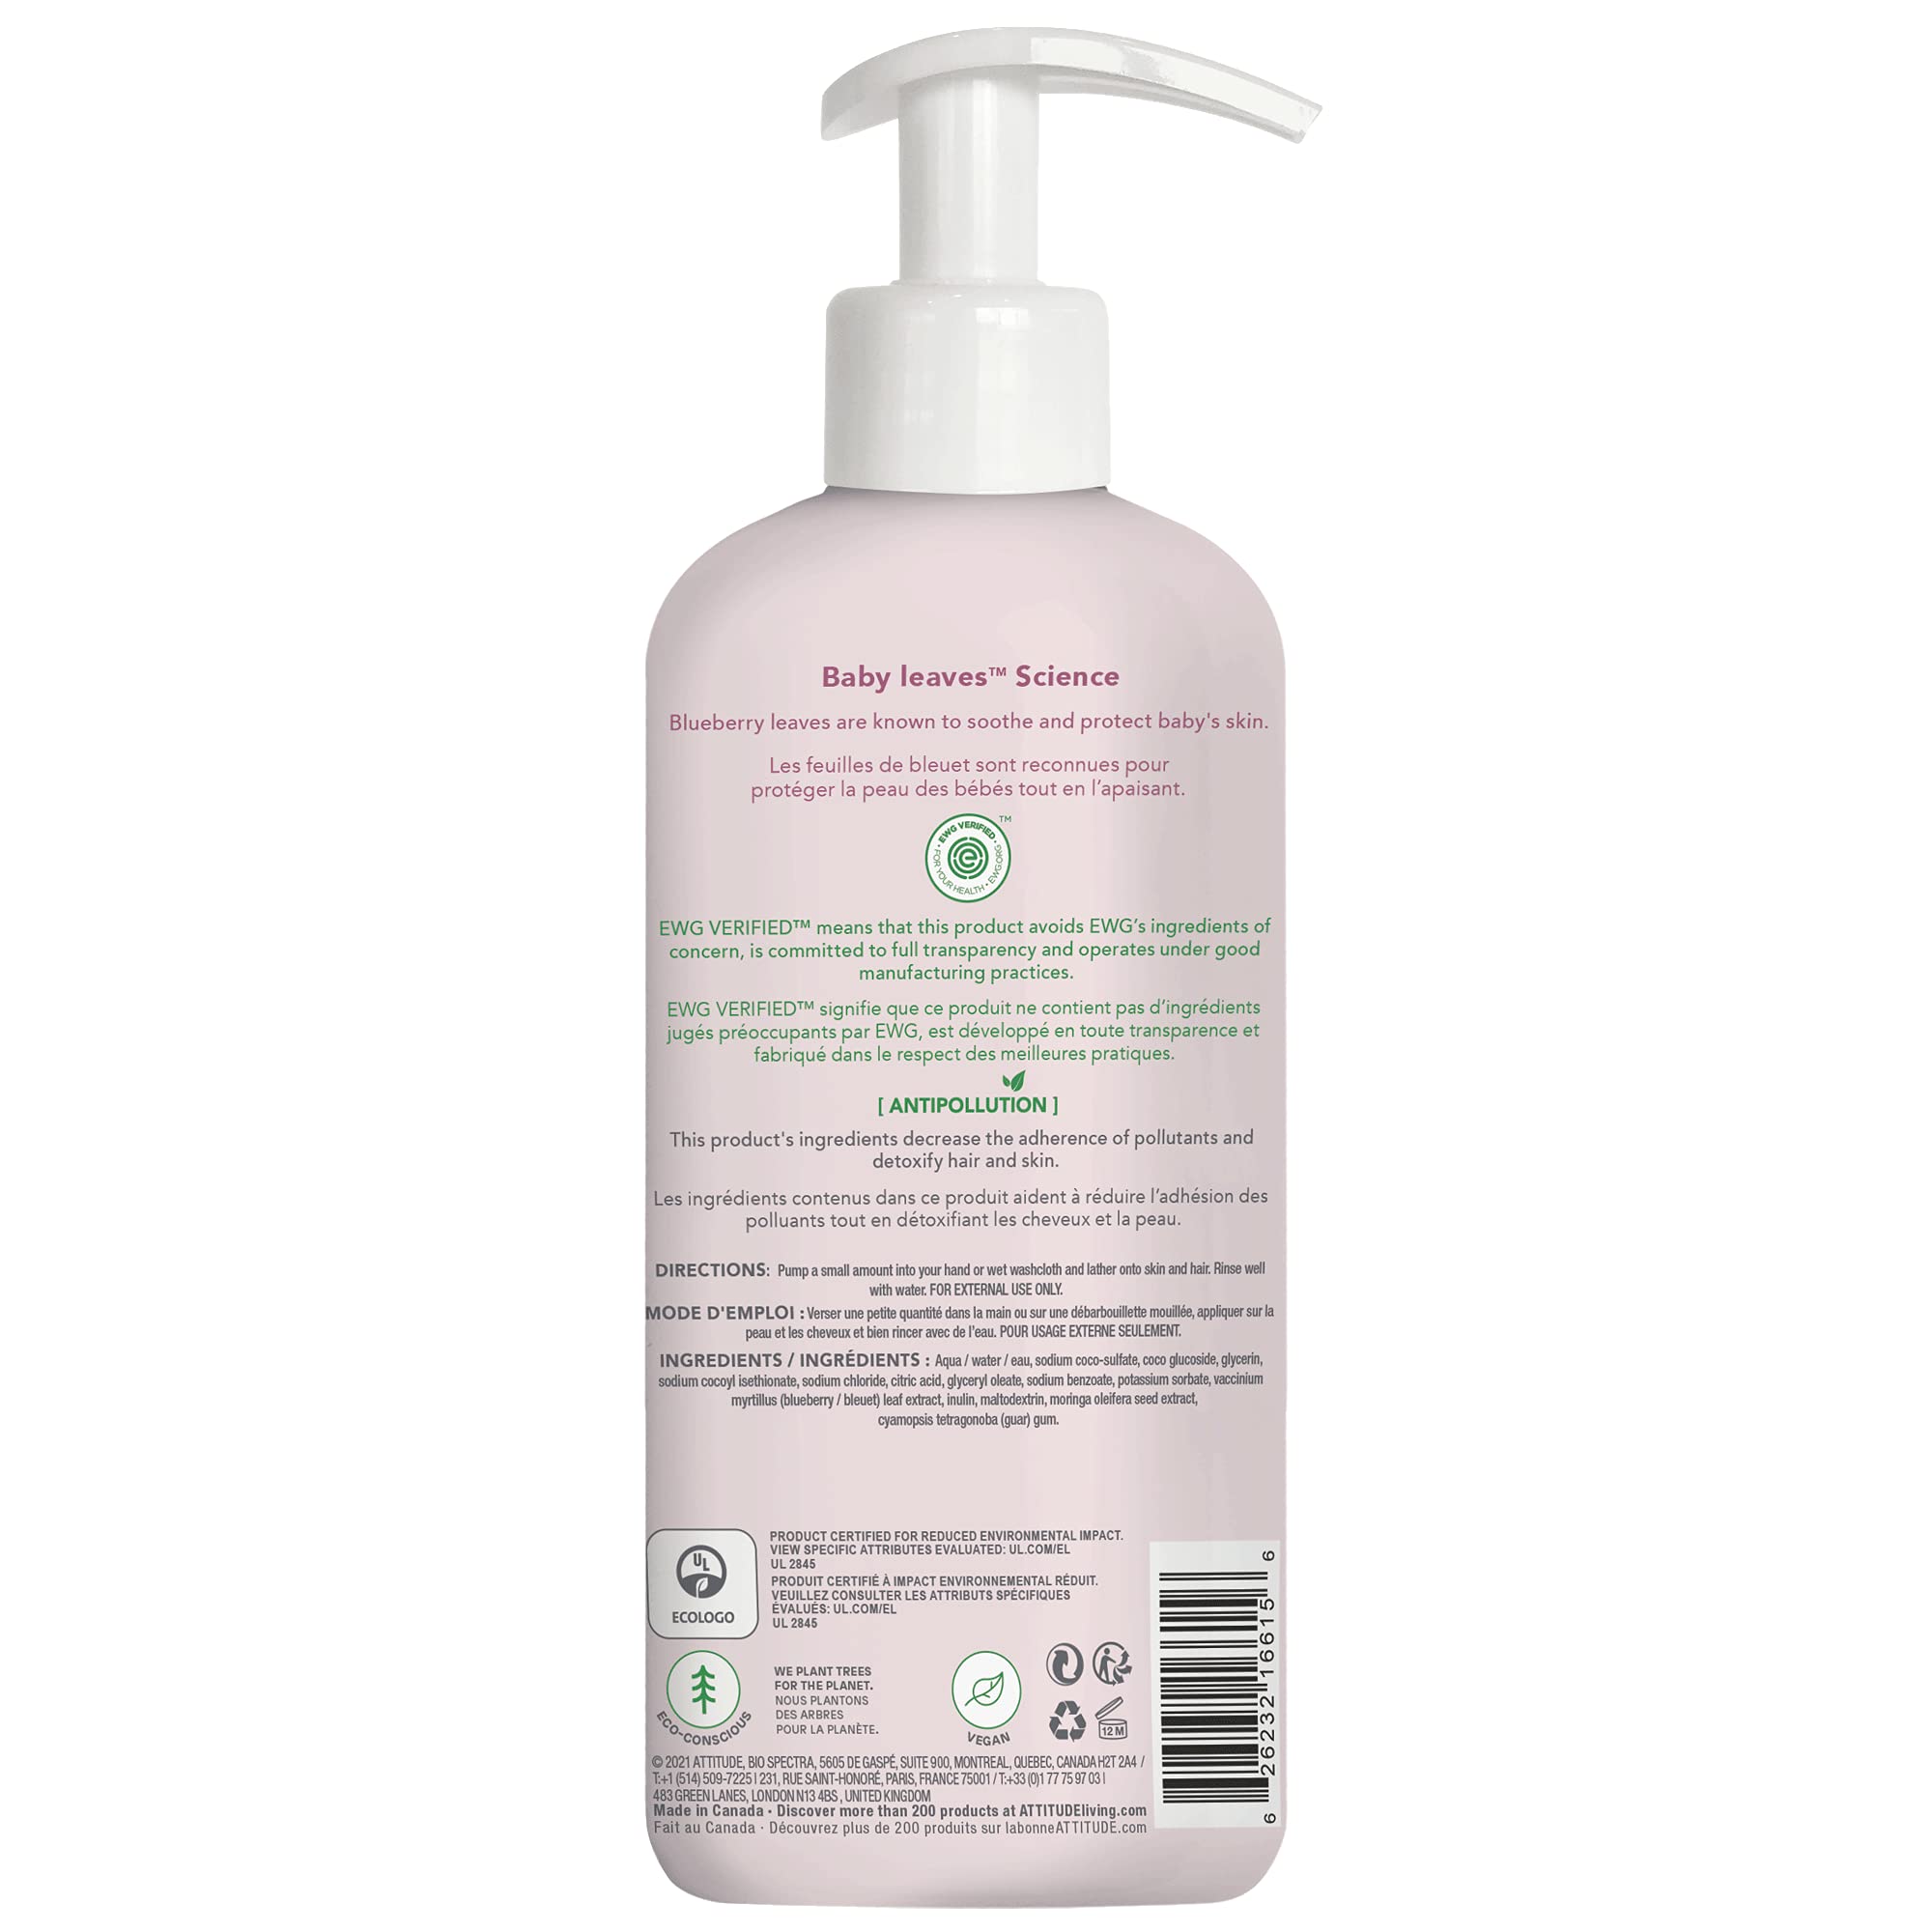 ATTITUDE 2-in-1 Shampoo and Body Wash for baby, EWG Verified, Plant and Mineral-Based Ingredients, Vegan and Cruelty-free Personal Care Products, Unscented, 16 Fl Oz (Pack of 6)